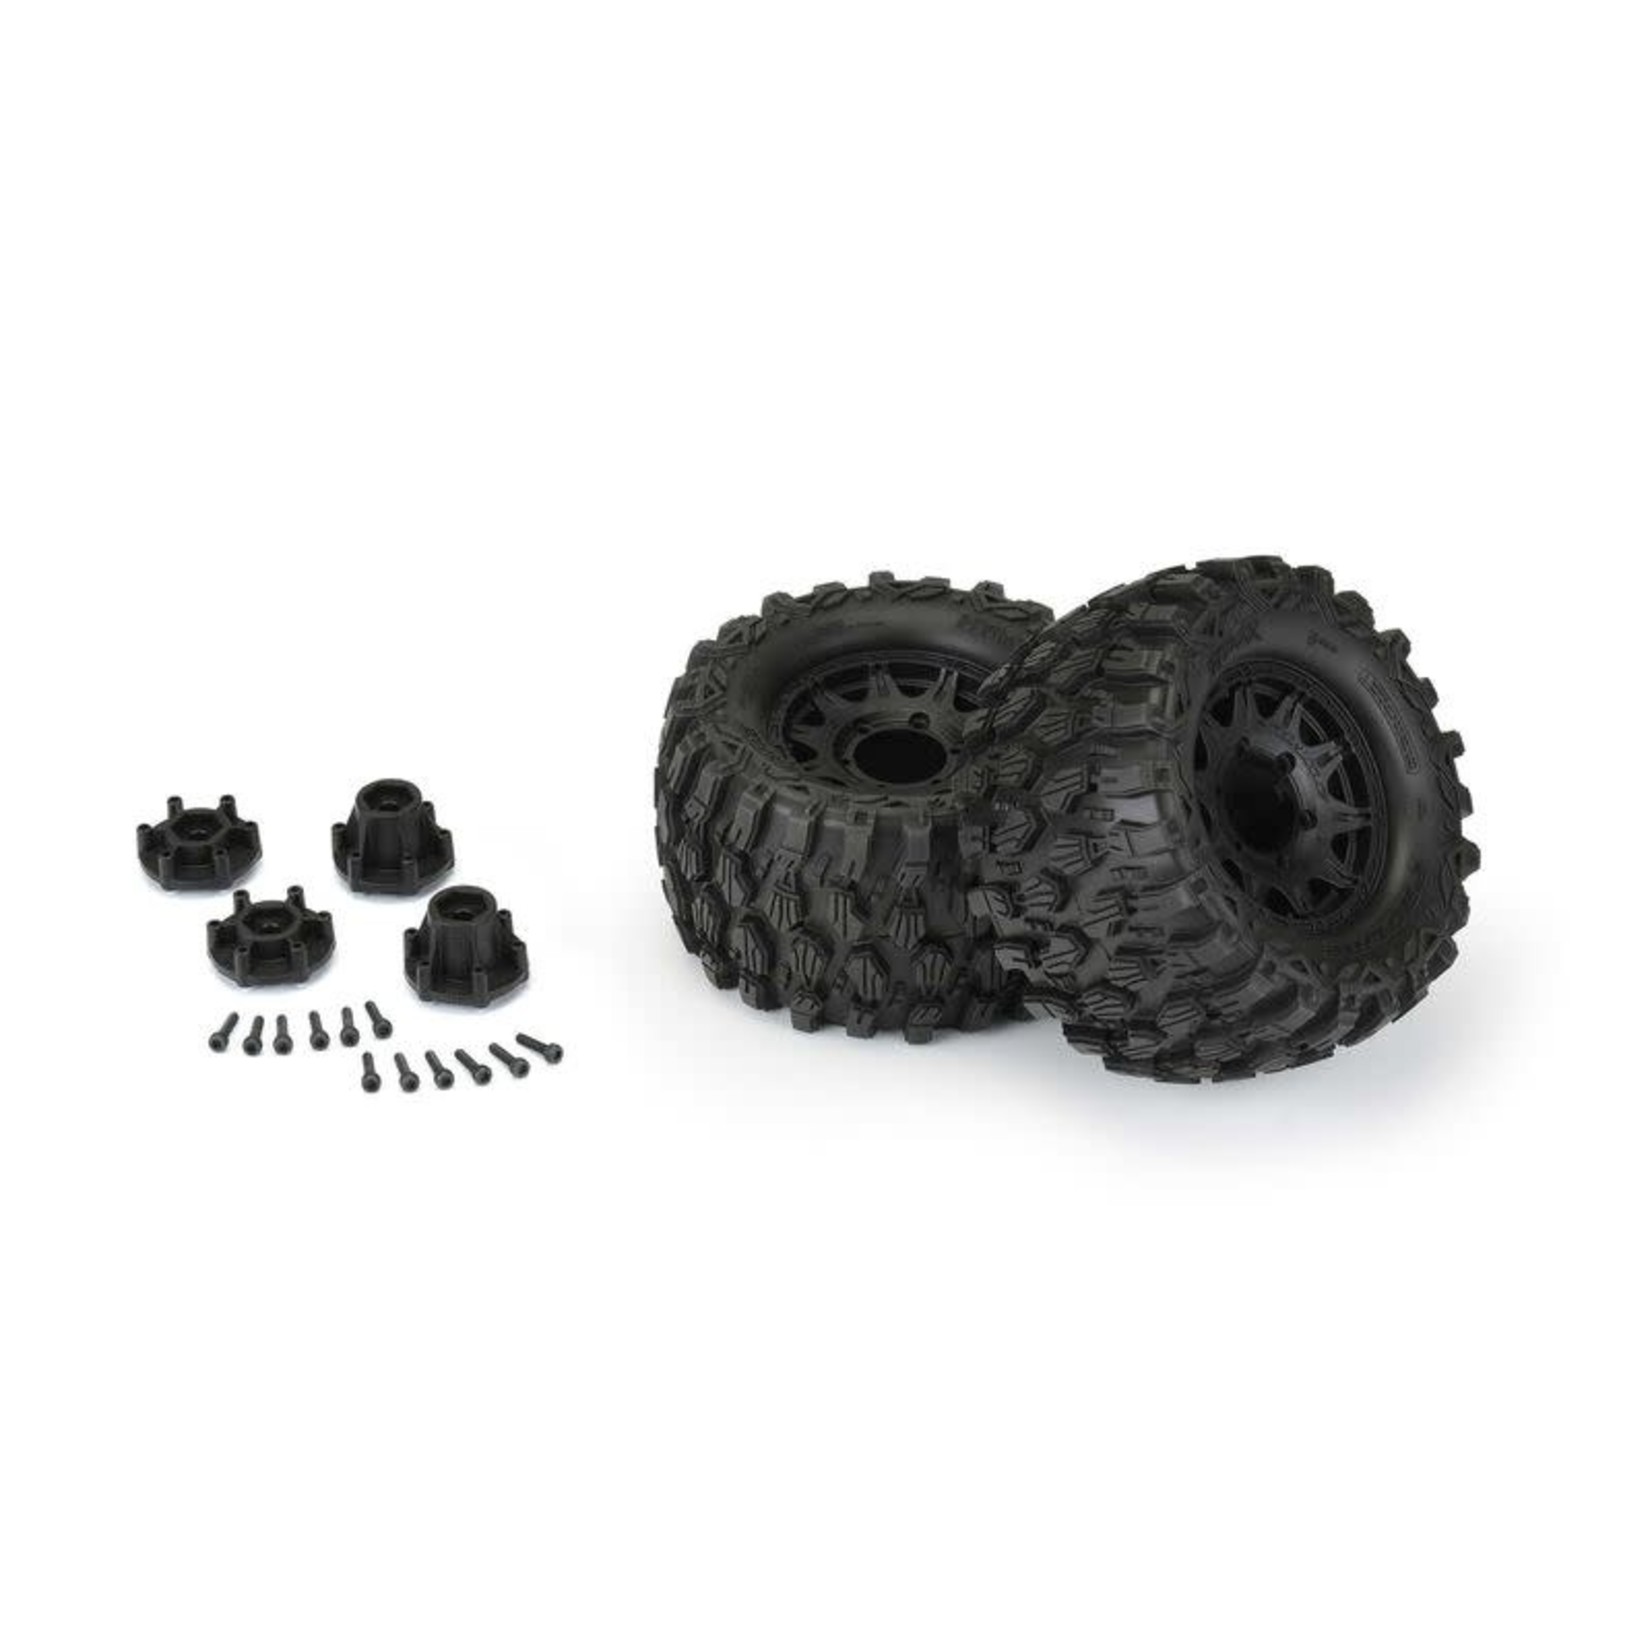 Pro-line Racing PRO1019010 Pro-Line 1/10 Hyrax Front/Rear 2.8" MT Tires Mounted 12mm Black  Raid (2)